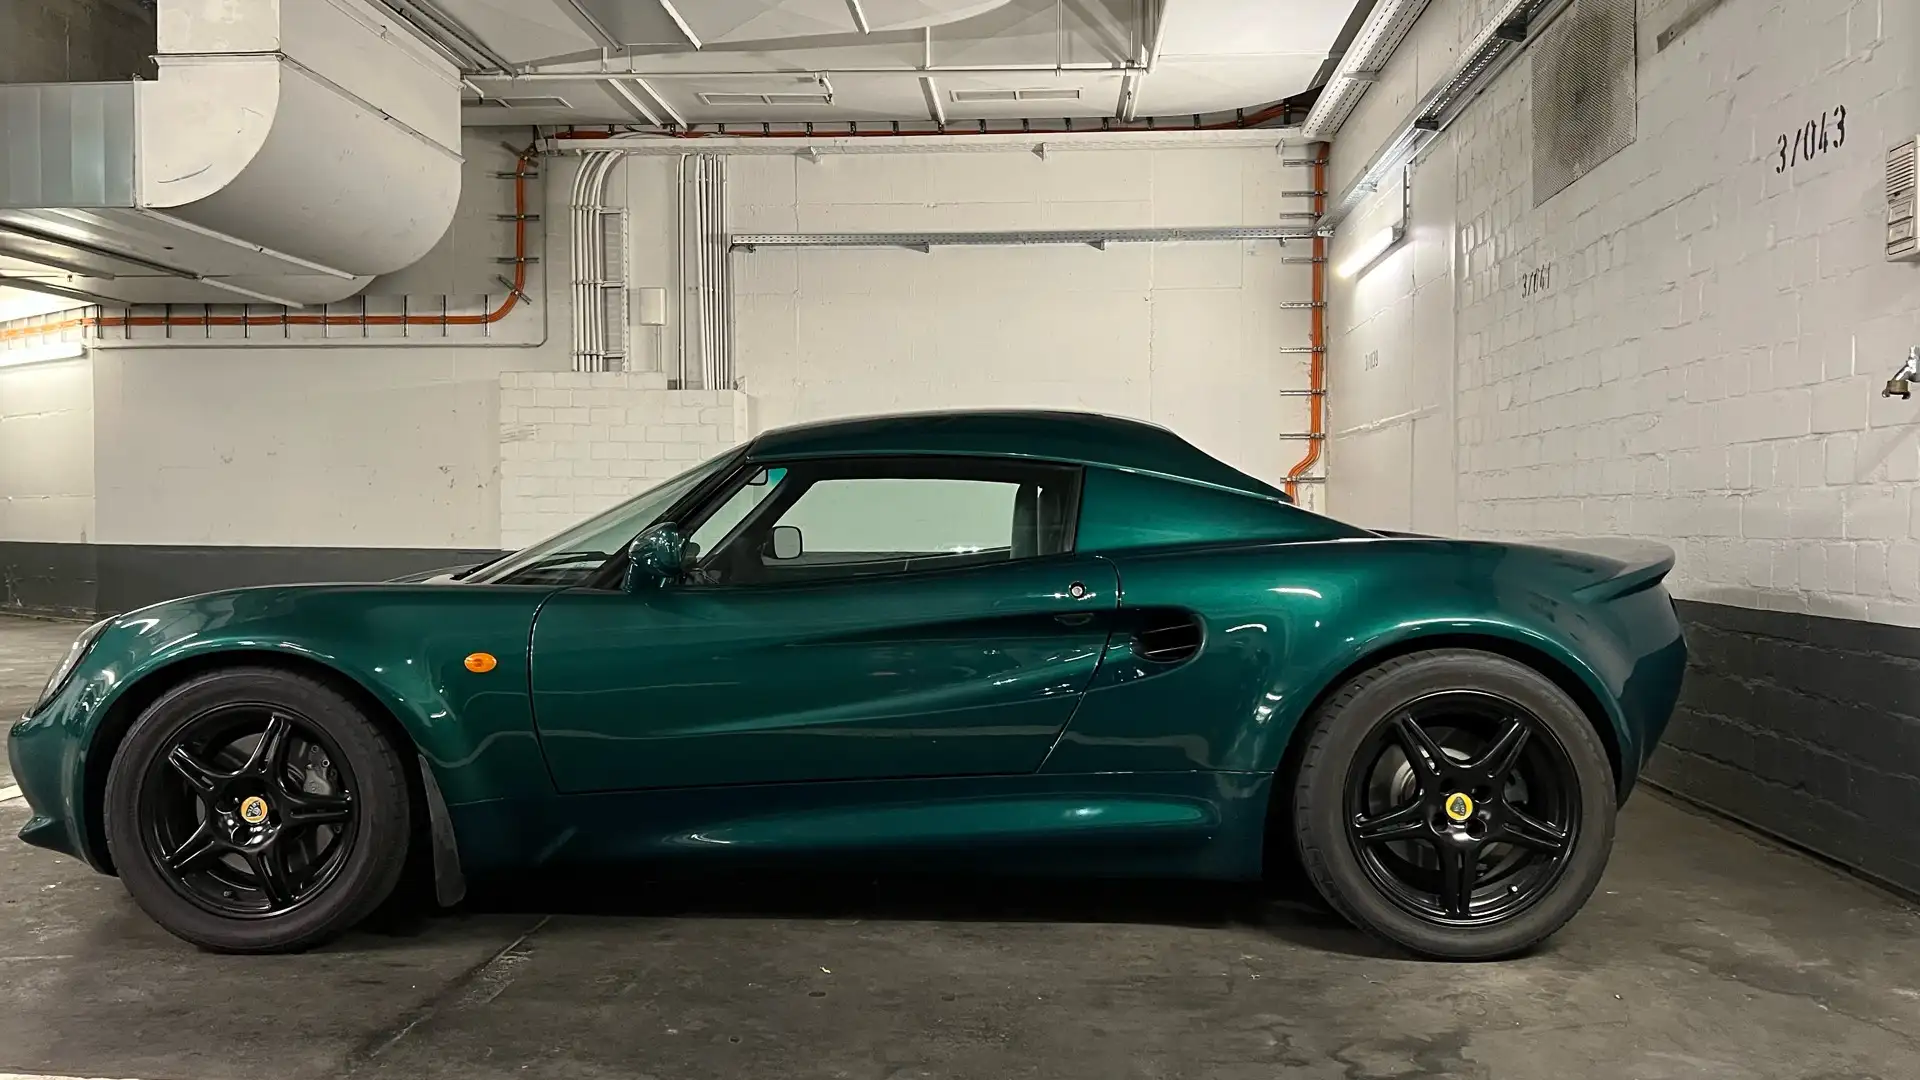 Lotus Elise LHD, Rotec, sehr guter Zustand Zielony - 2